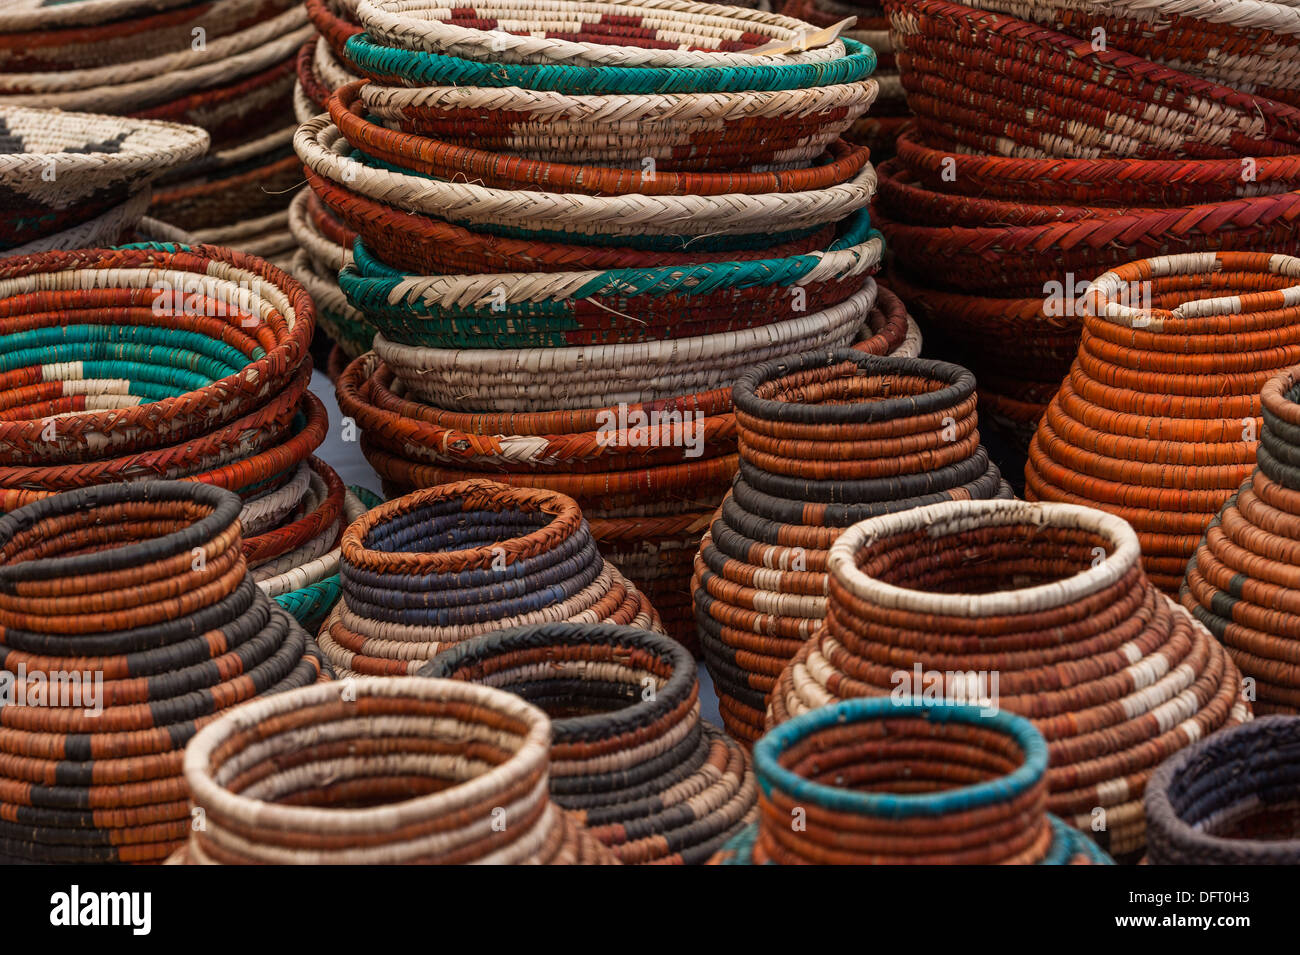 Native American baskets for sale Stock Photo